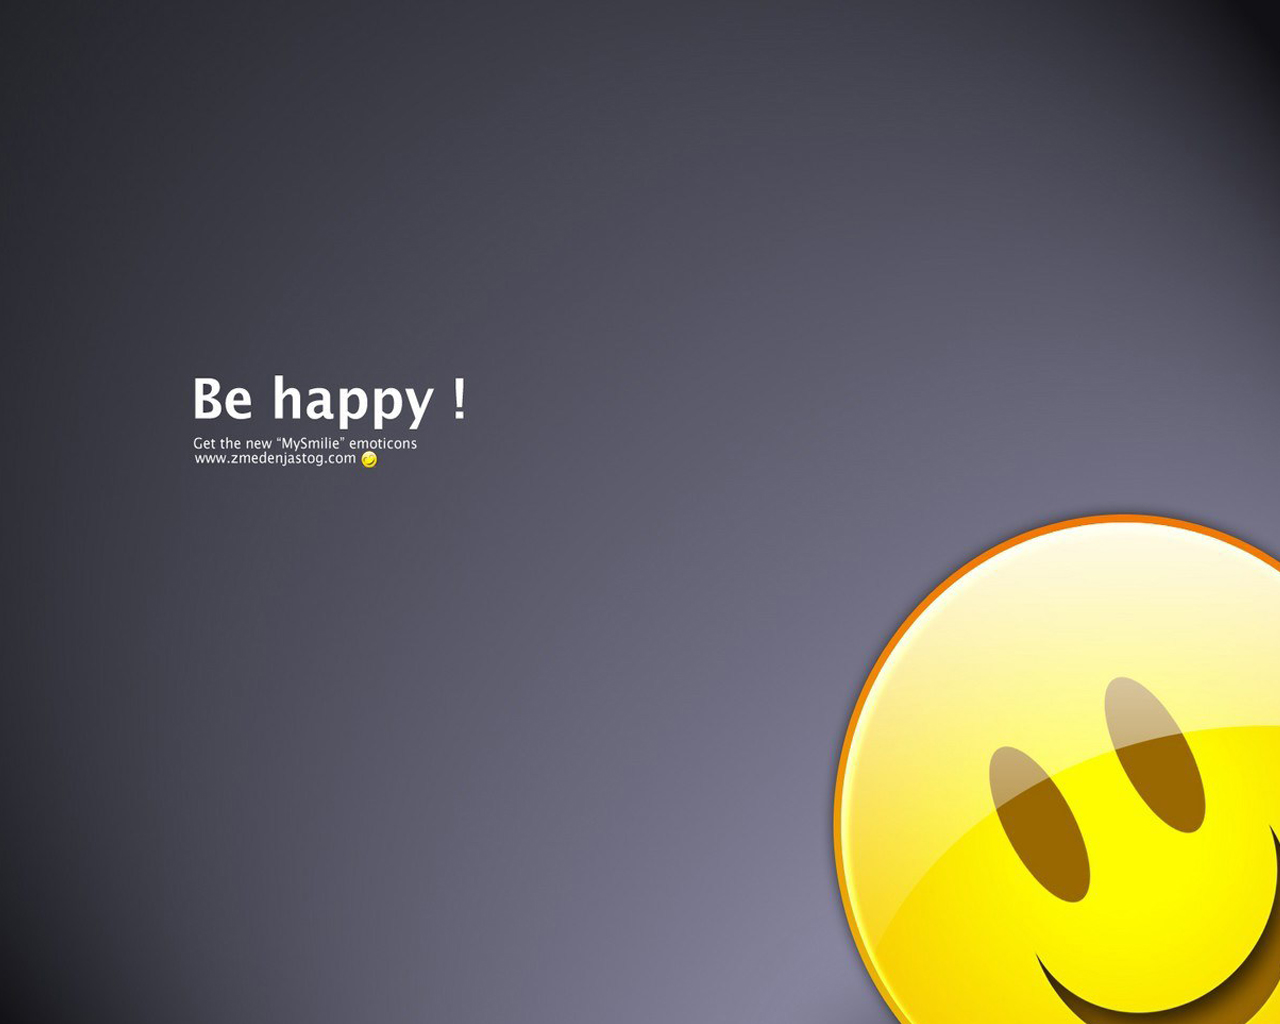 Be Happy Wallpapers